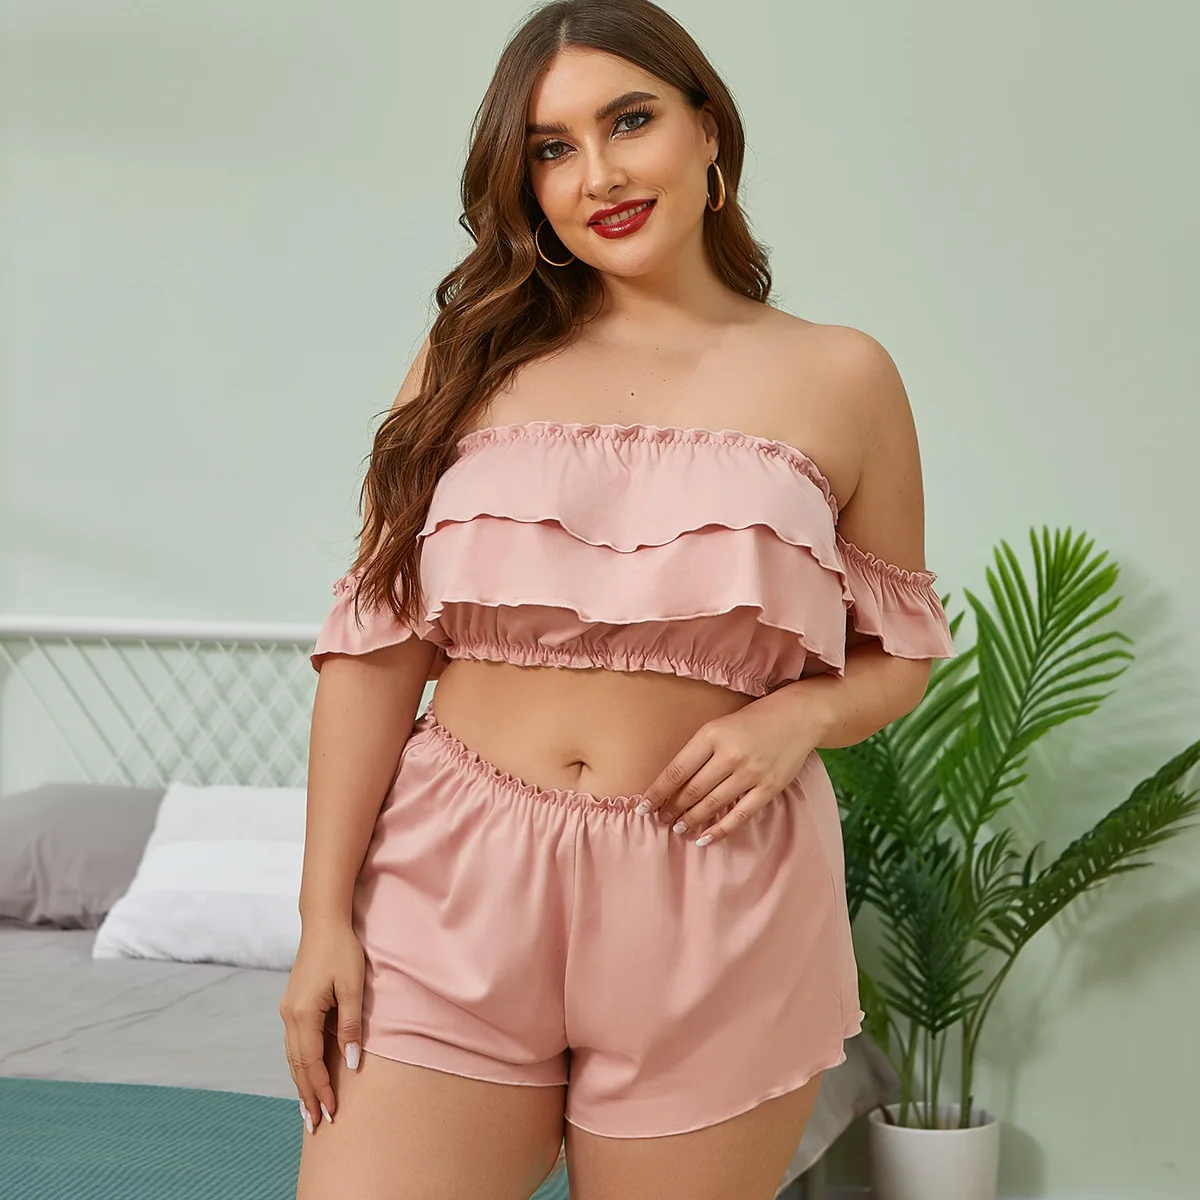 

Vendor Plus Size Young Girls Sexy In Bridesmaid Nighty Pyjamas Lingeries Fat Girl Sleepwear Shorts Lingerie Sets With Sleeves, Pink